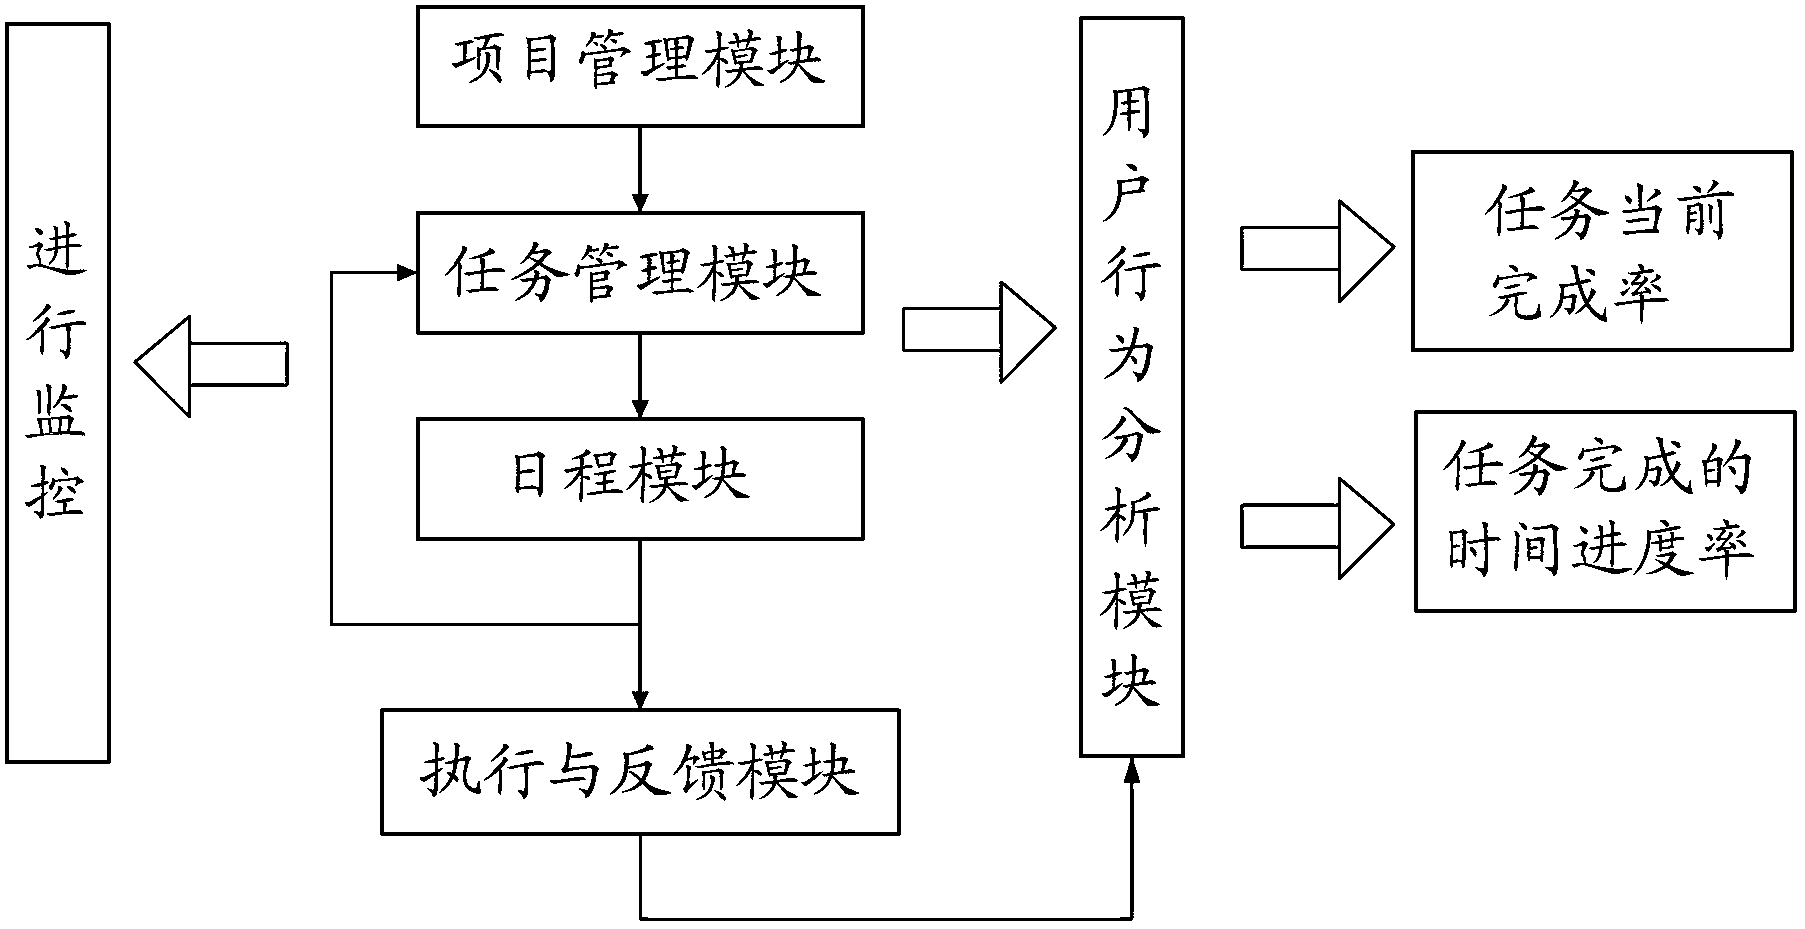 Monitoring and early-warning system of enterprise project executing schedule